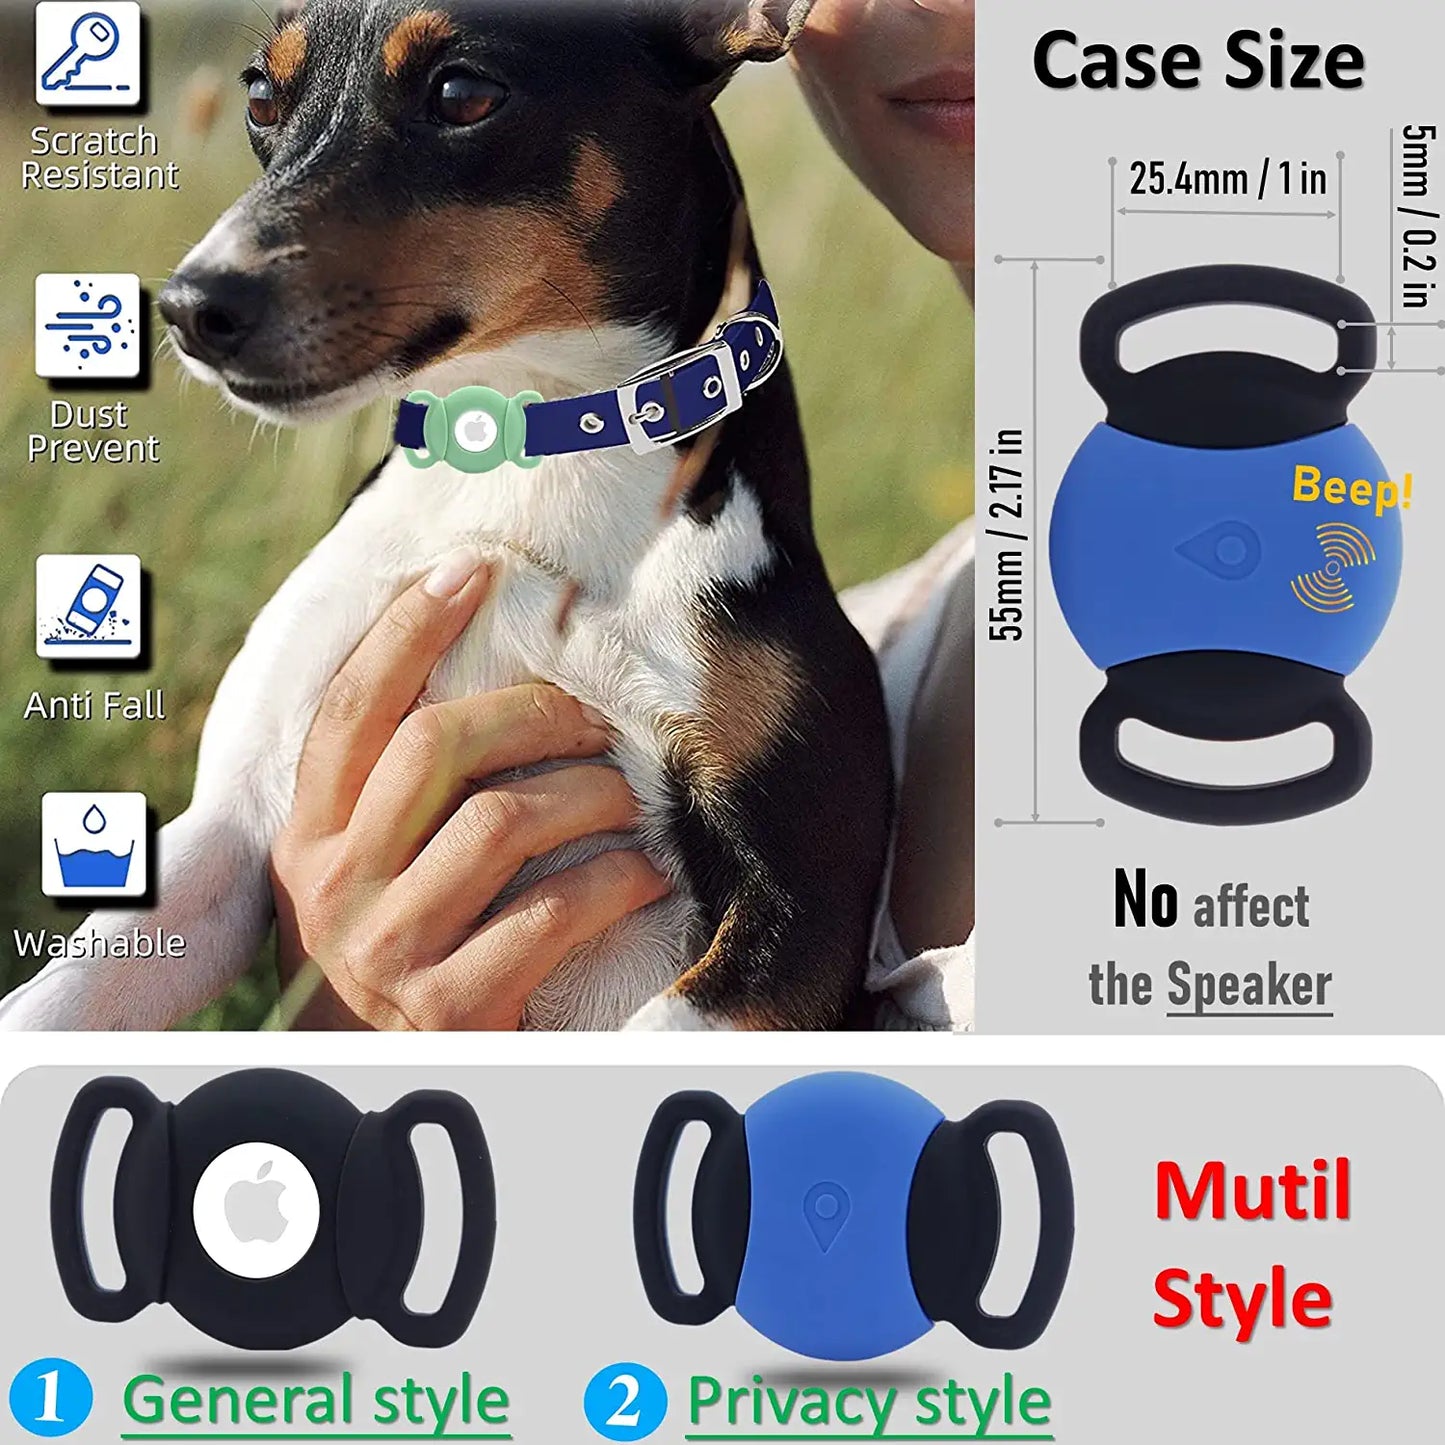 Waterproof Case for Apple Airtags for Dog Collar, Silicone Accessories for GPS Tracker,Slim Dropper for Pet Finder Tag,Secure Lightweight Holder for Smart Airtag,4 Packs (Black,Pink,Green,Blue)